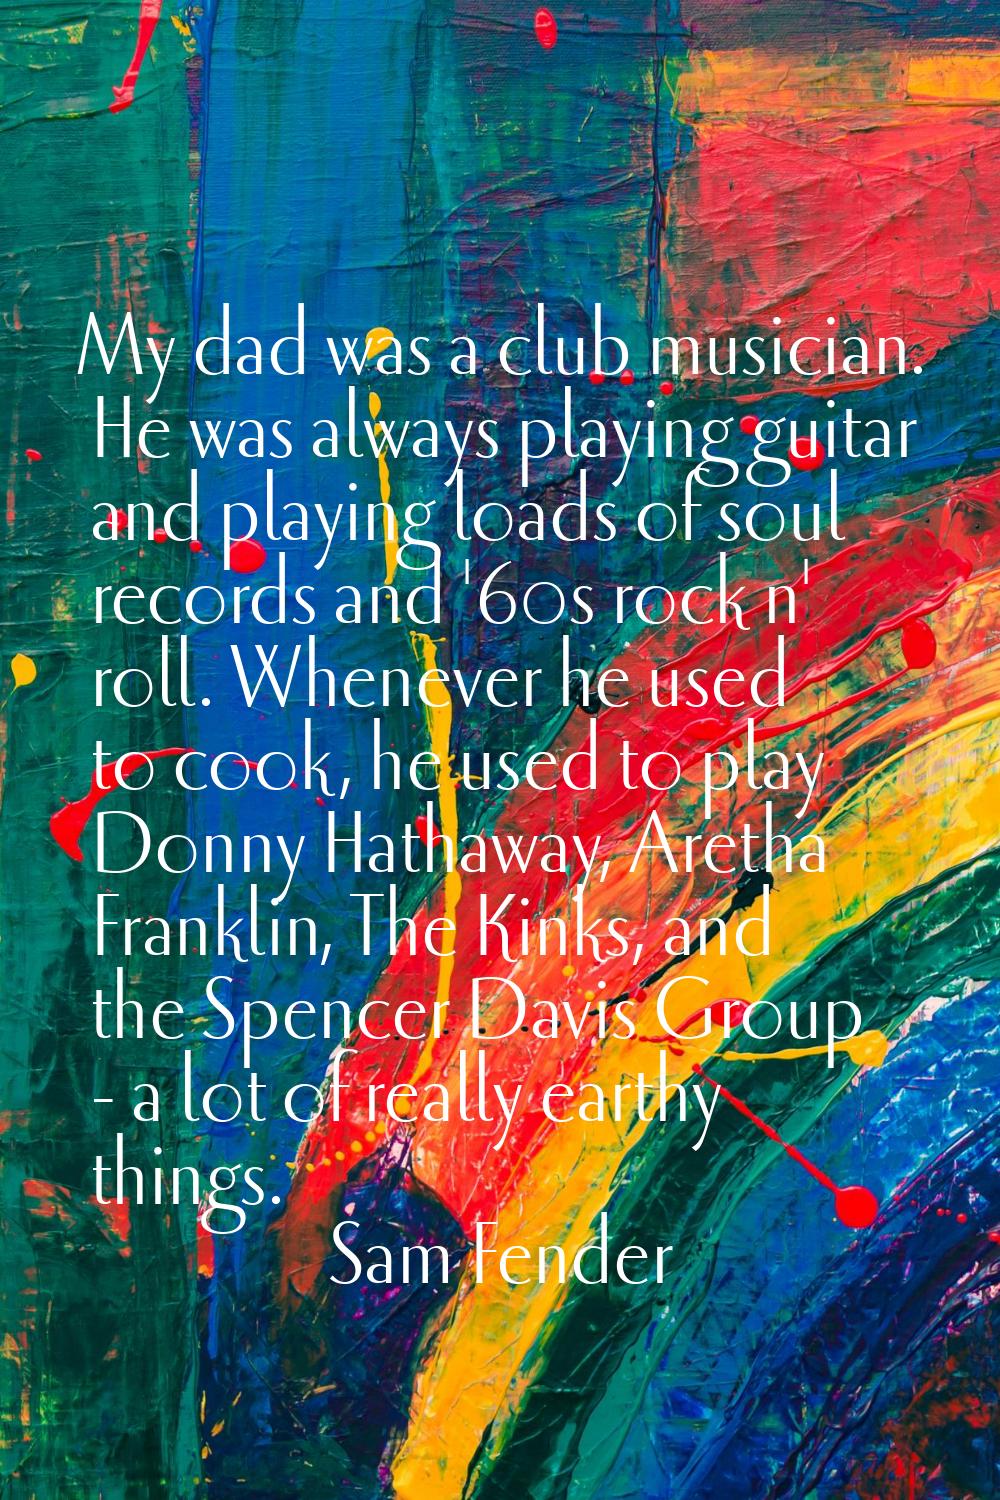 My dad was a club musician. He was always playing guitar and playing loads of soul records and '60s